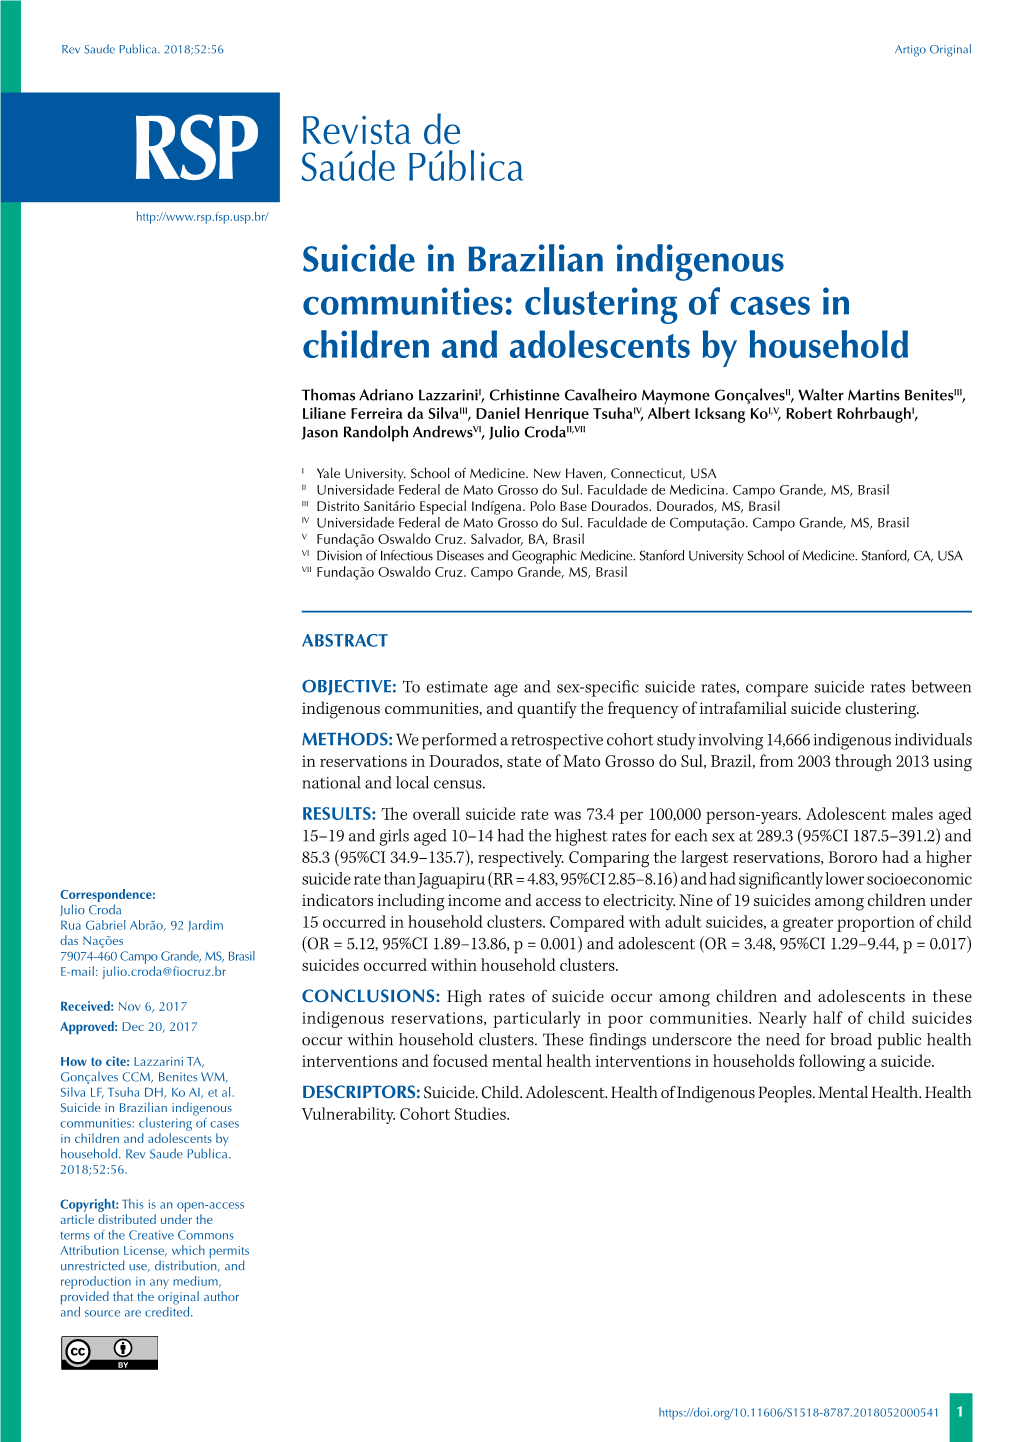 Suicide in Brazilian Indigenous Communities: Clustering of Cases in Children and Adolescents by Household